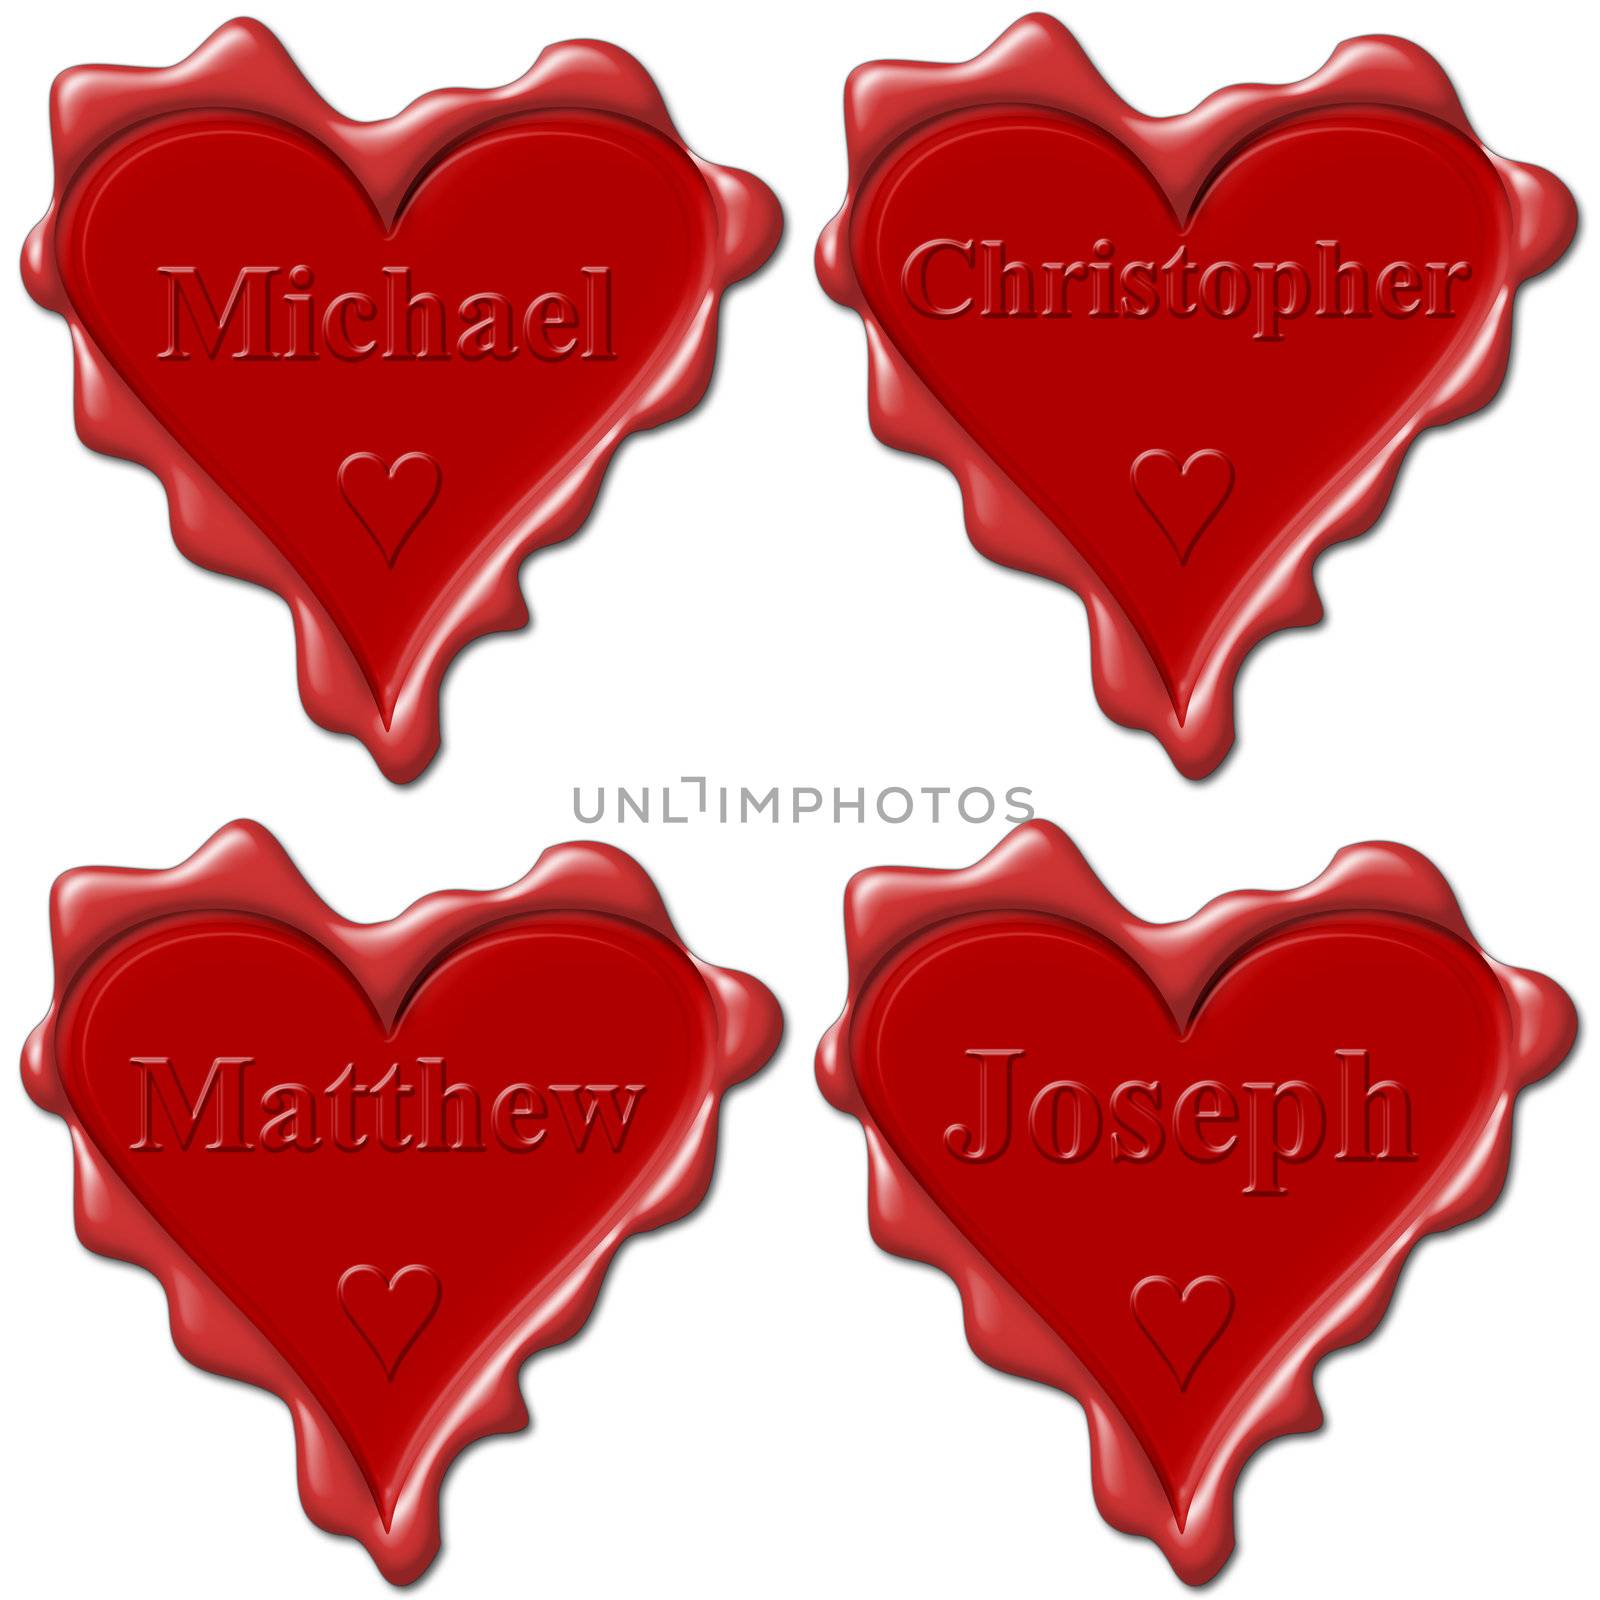 Valentine love hearts with names: Michael, Christopher, Matthew, by mozzyb